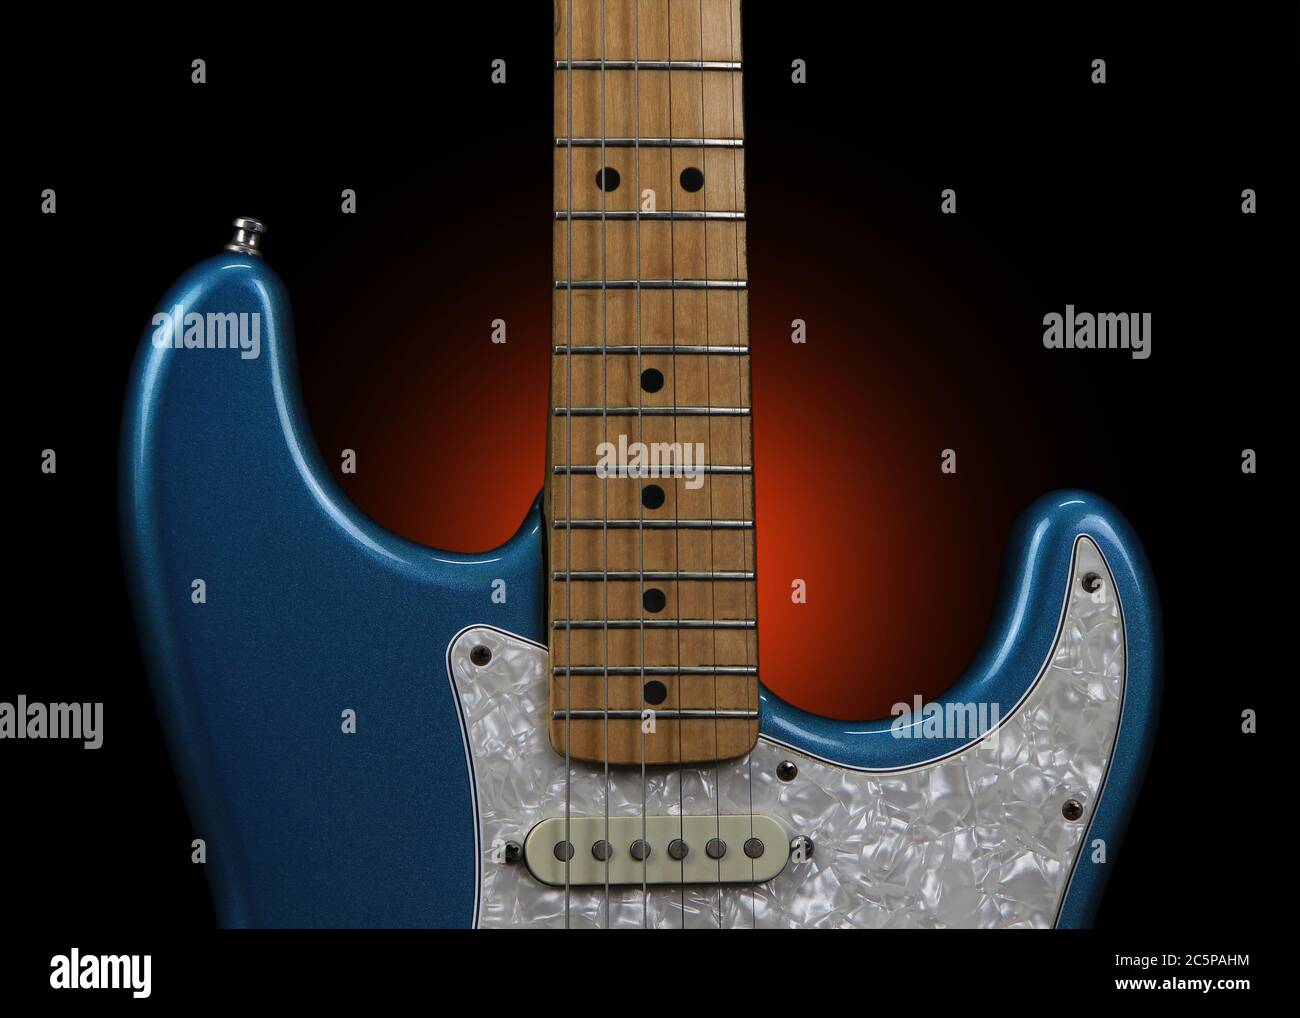 Detail of a Fender Stratocaster electric guitar in Blue Sparkle showing the cutouts, fingerboard and frets, one single-coil pickup, and the top of the white pearl pickguard. Stock Photo